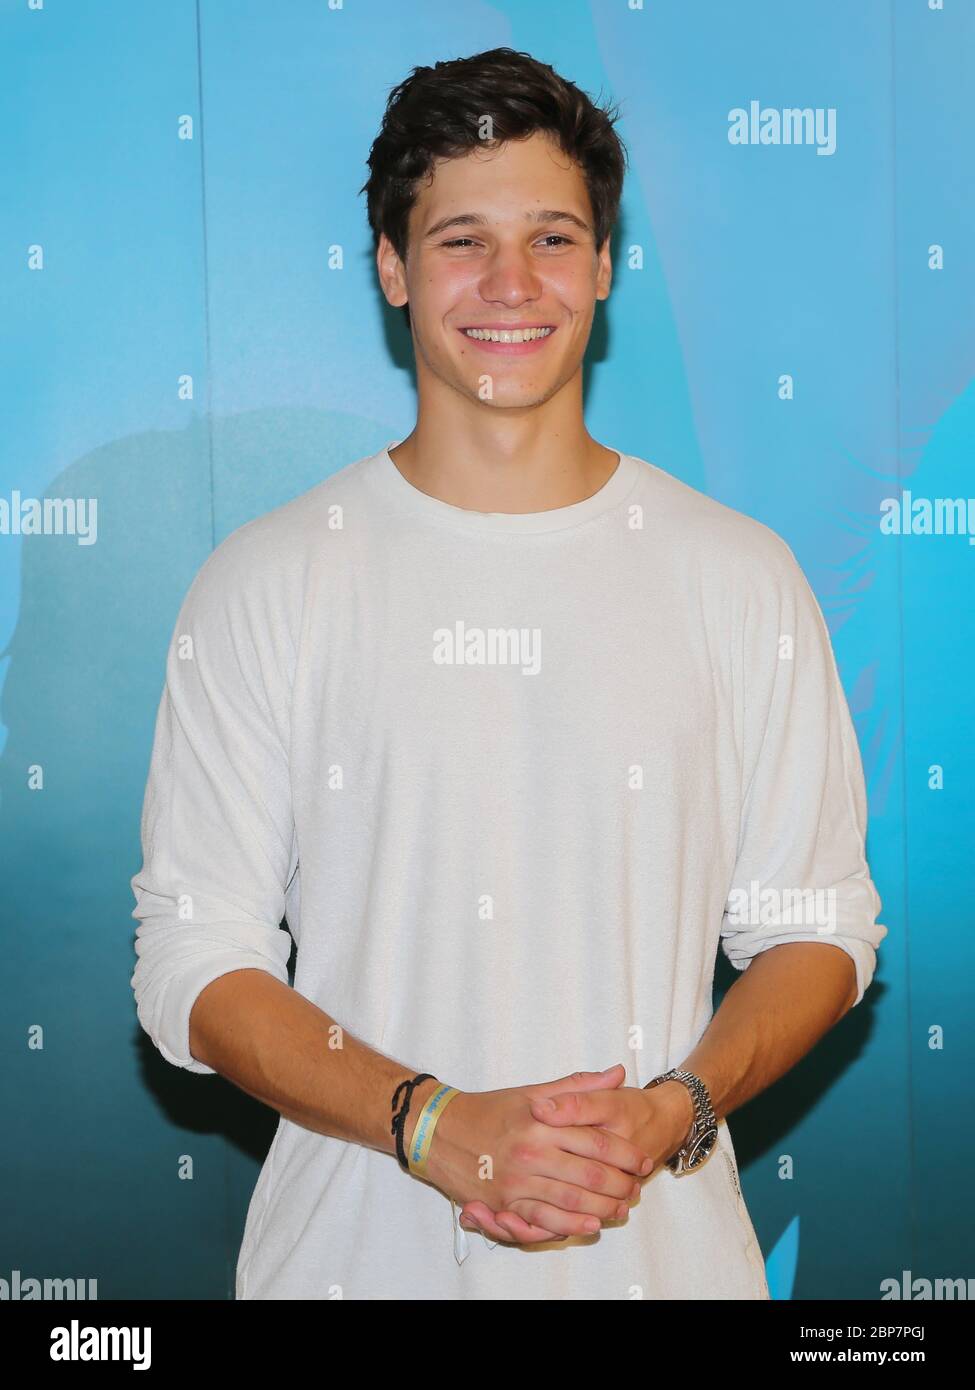 German pop singer and songwriter Wincent Weiss at Stars for Free 2019 in Magdeburg Stock Photo